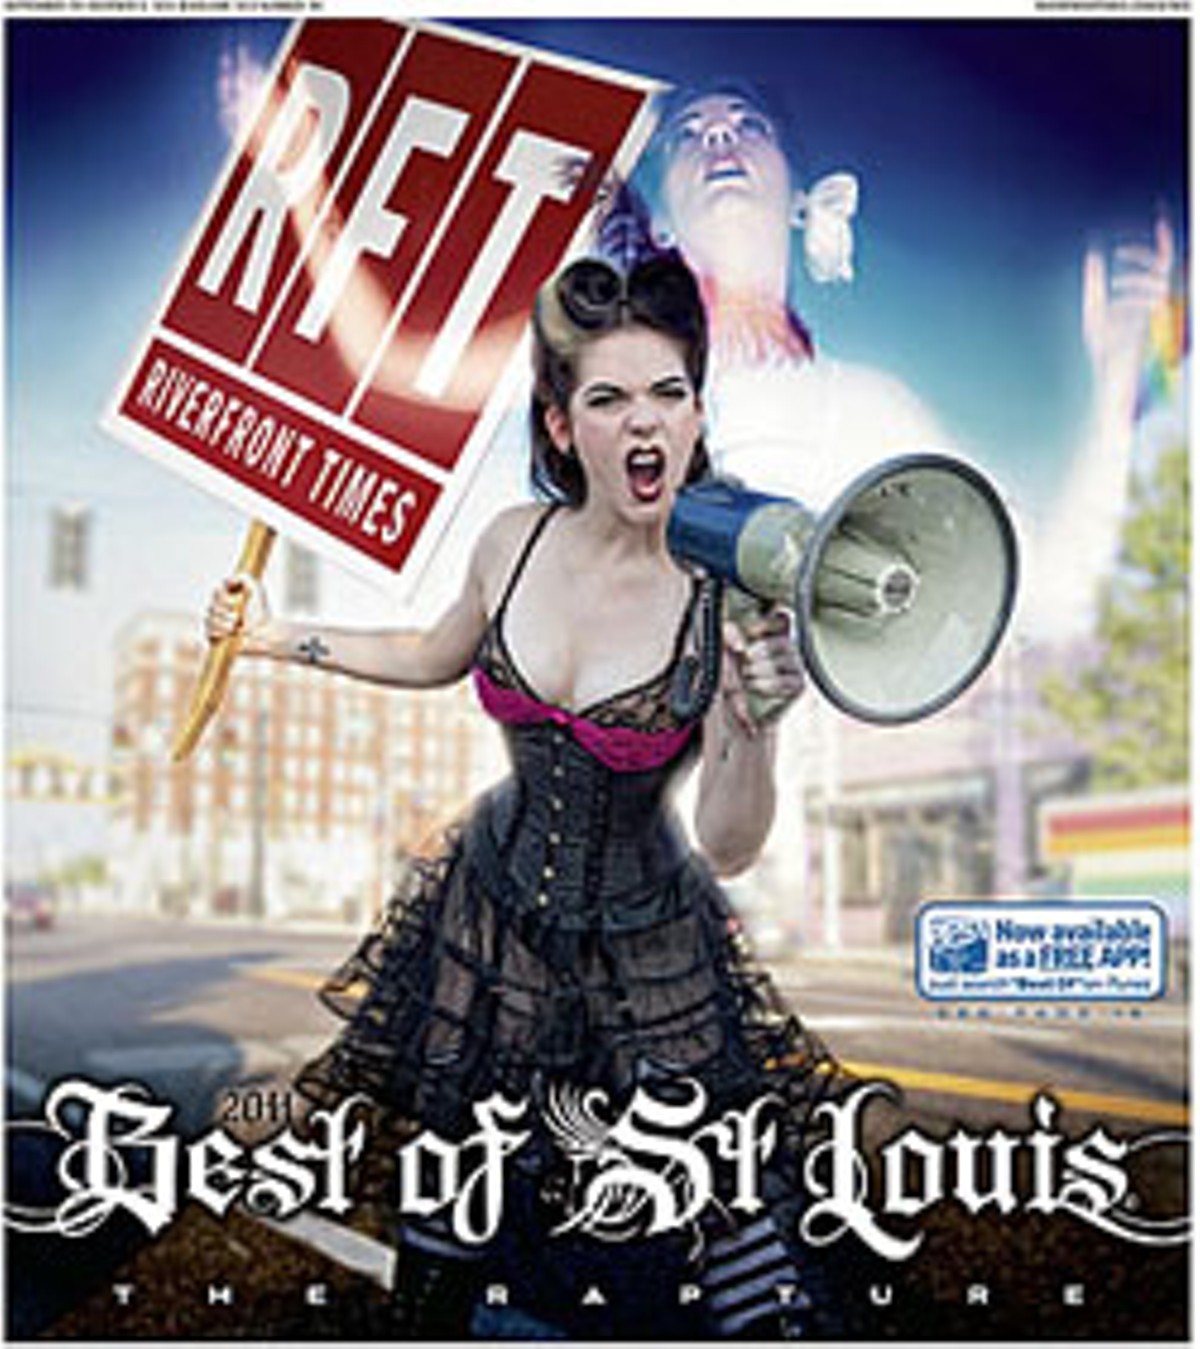 Best of St. Louis 2011 Issue Cover